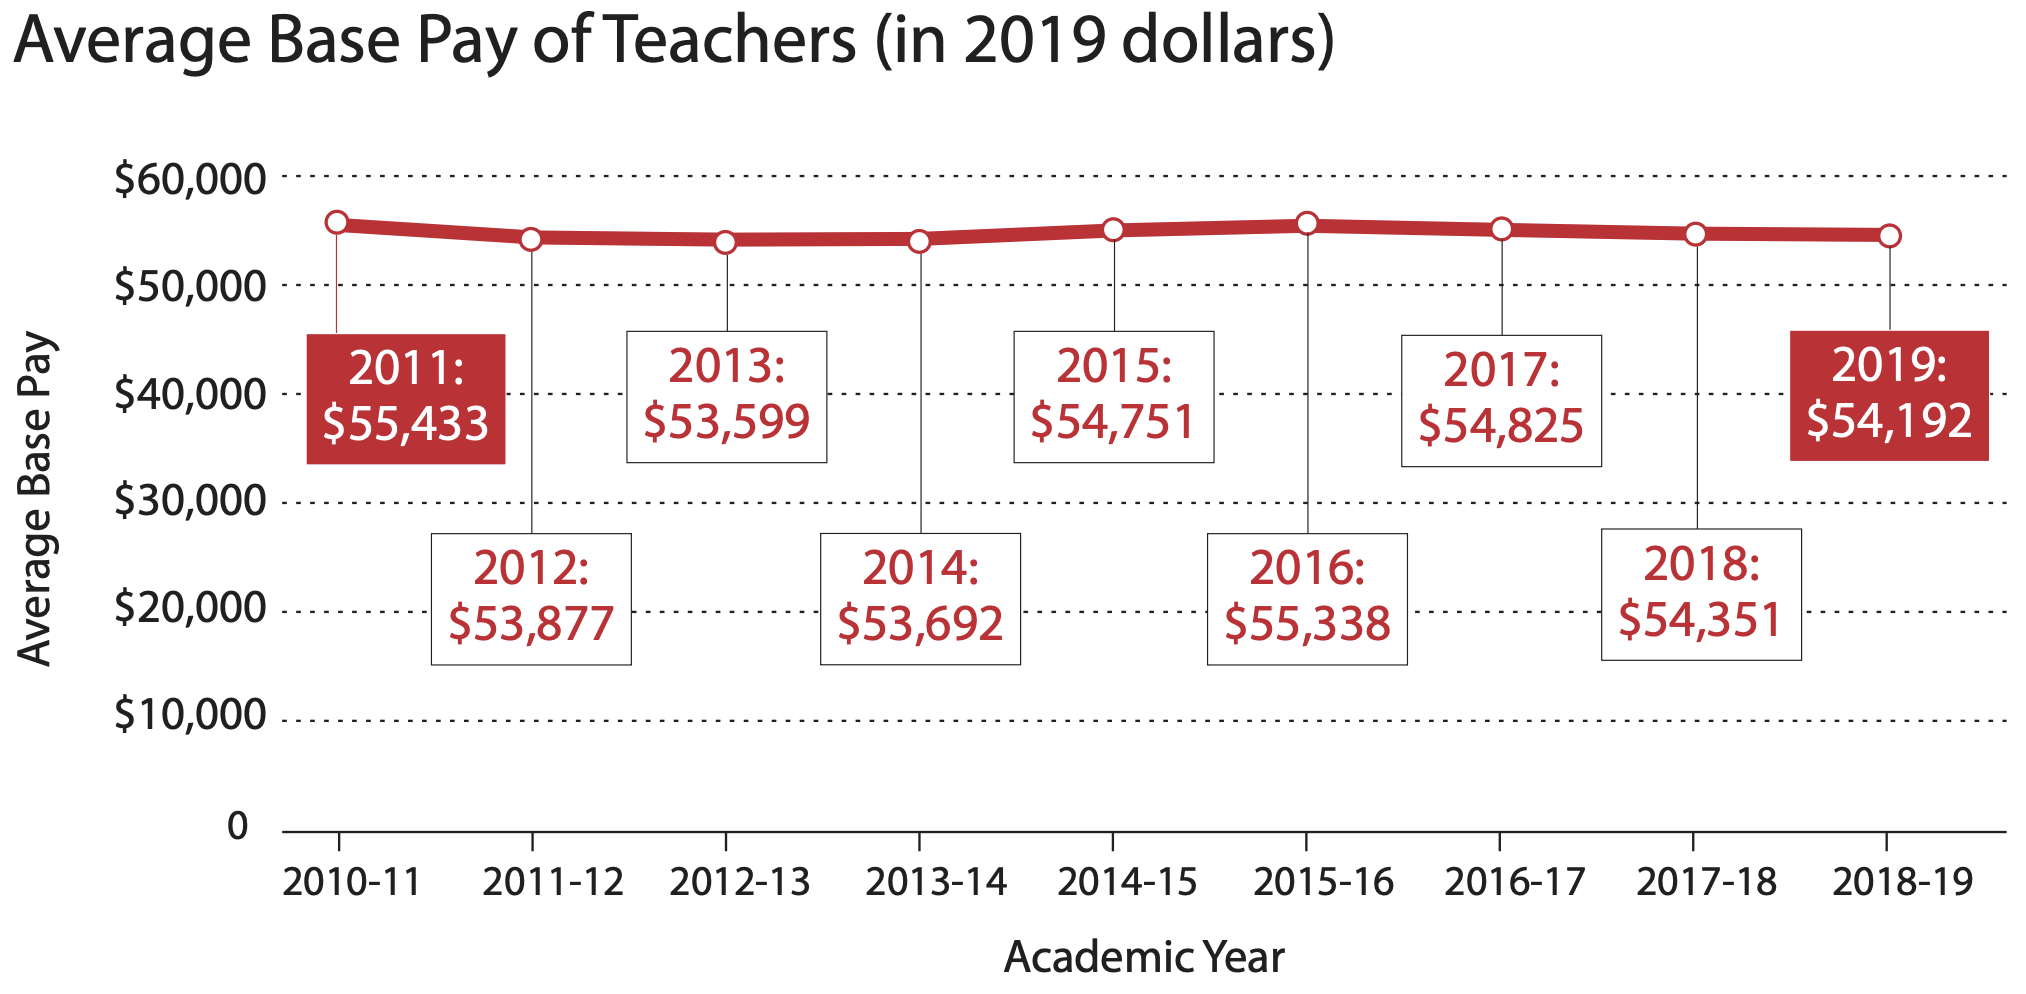 According to research from Dr. Horn, the average base pay of teachers has declined since 2011.